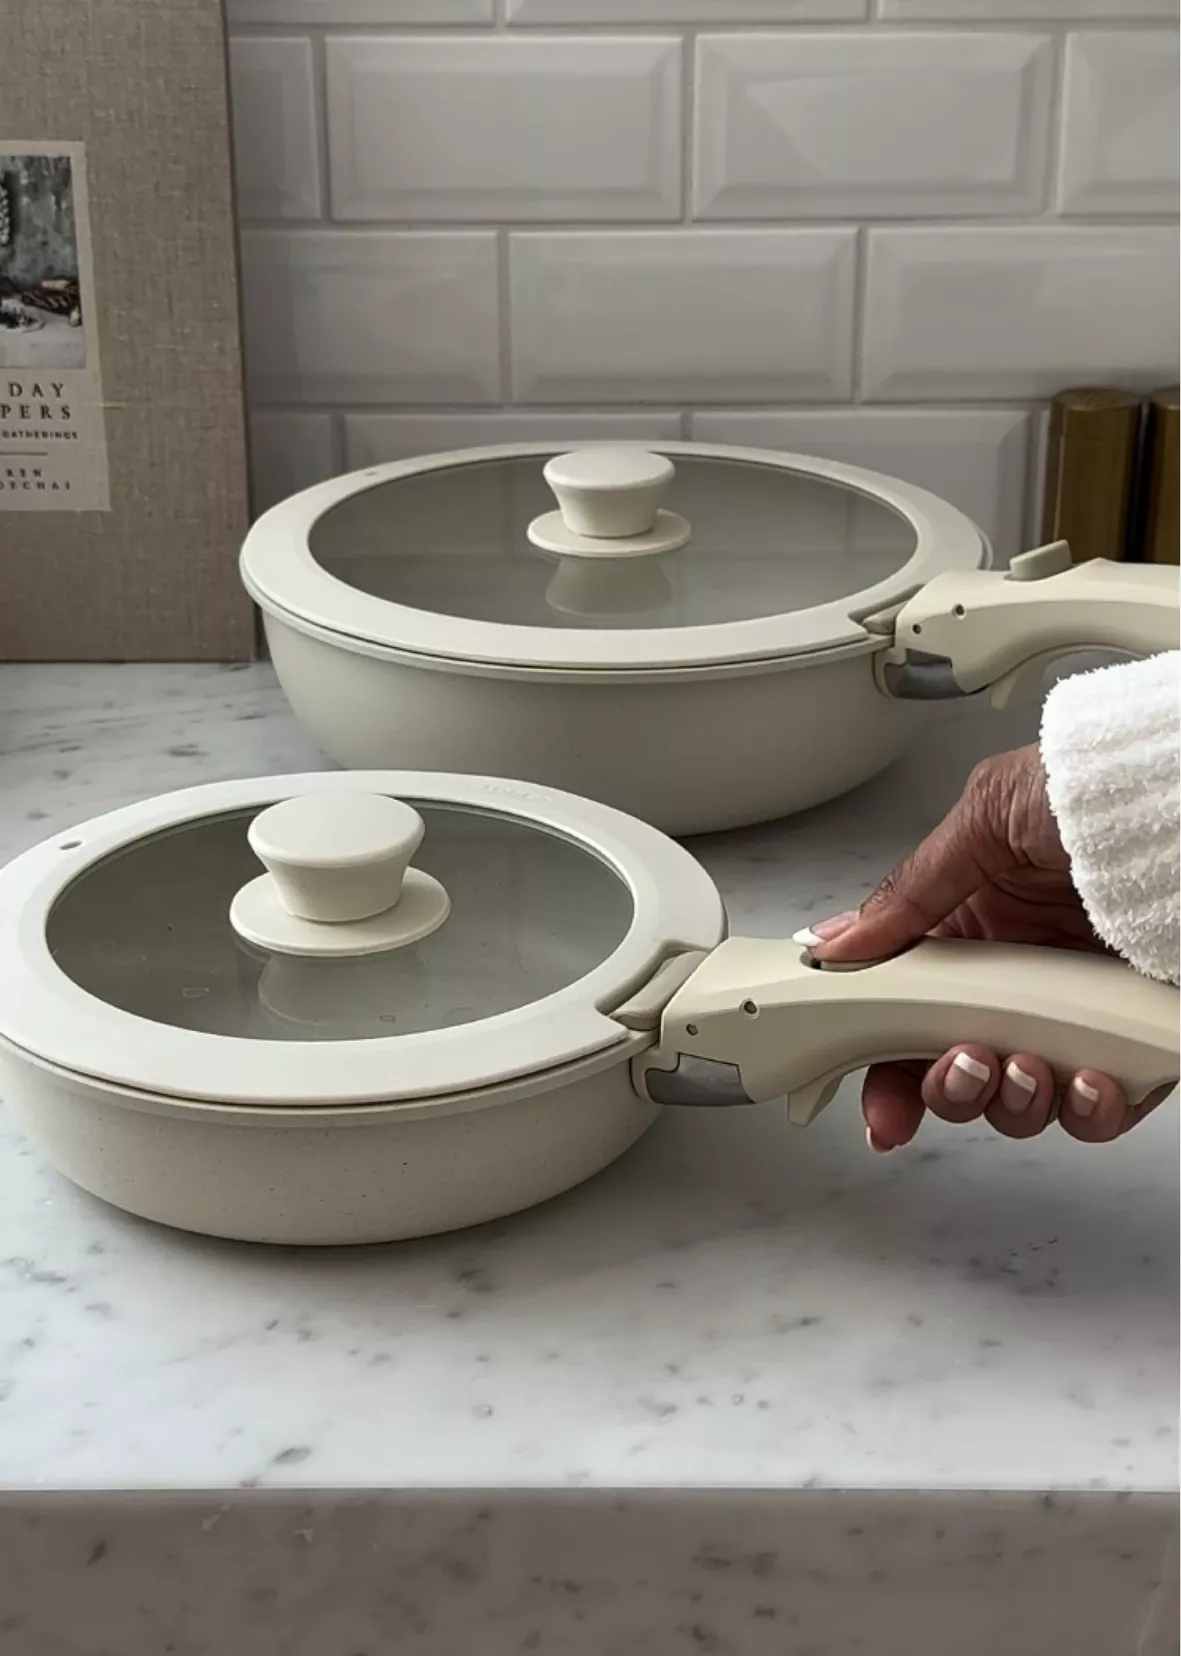 This Carote cookware set has detachable handles to save space